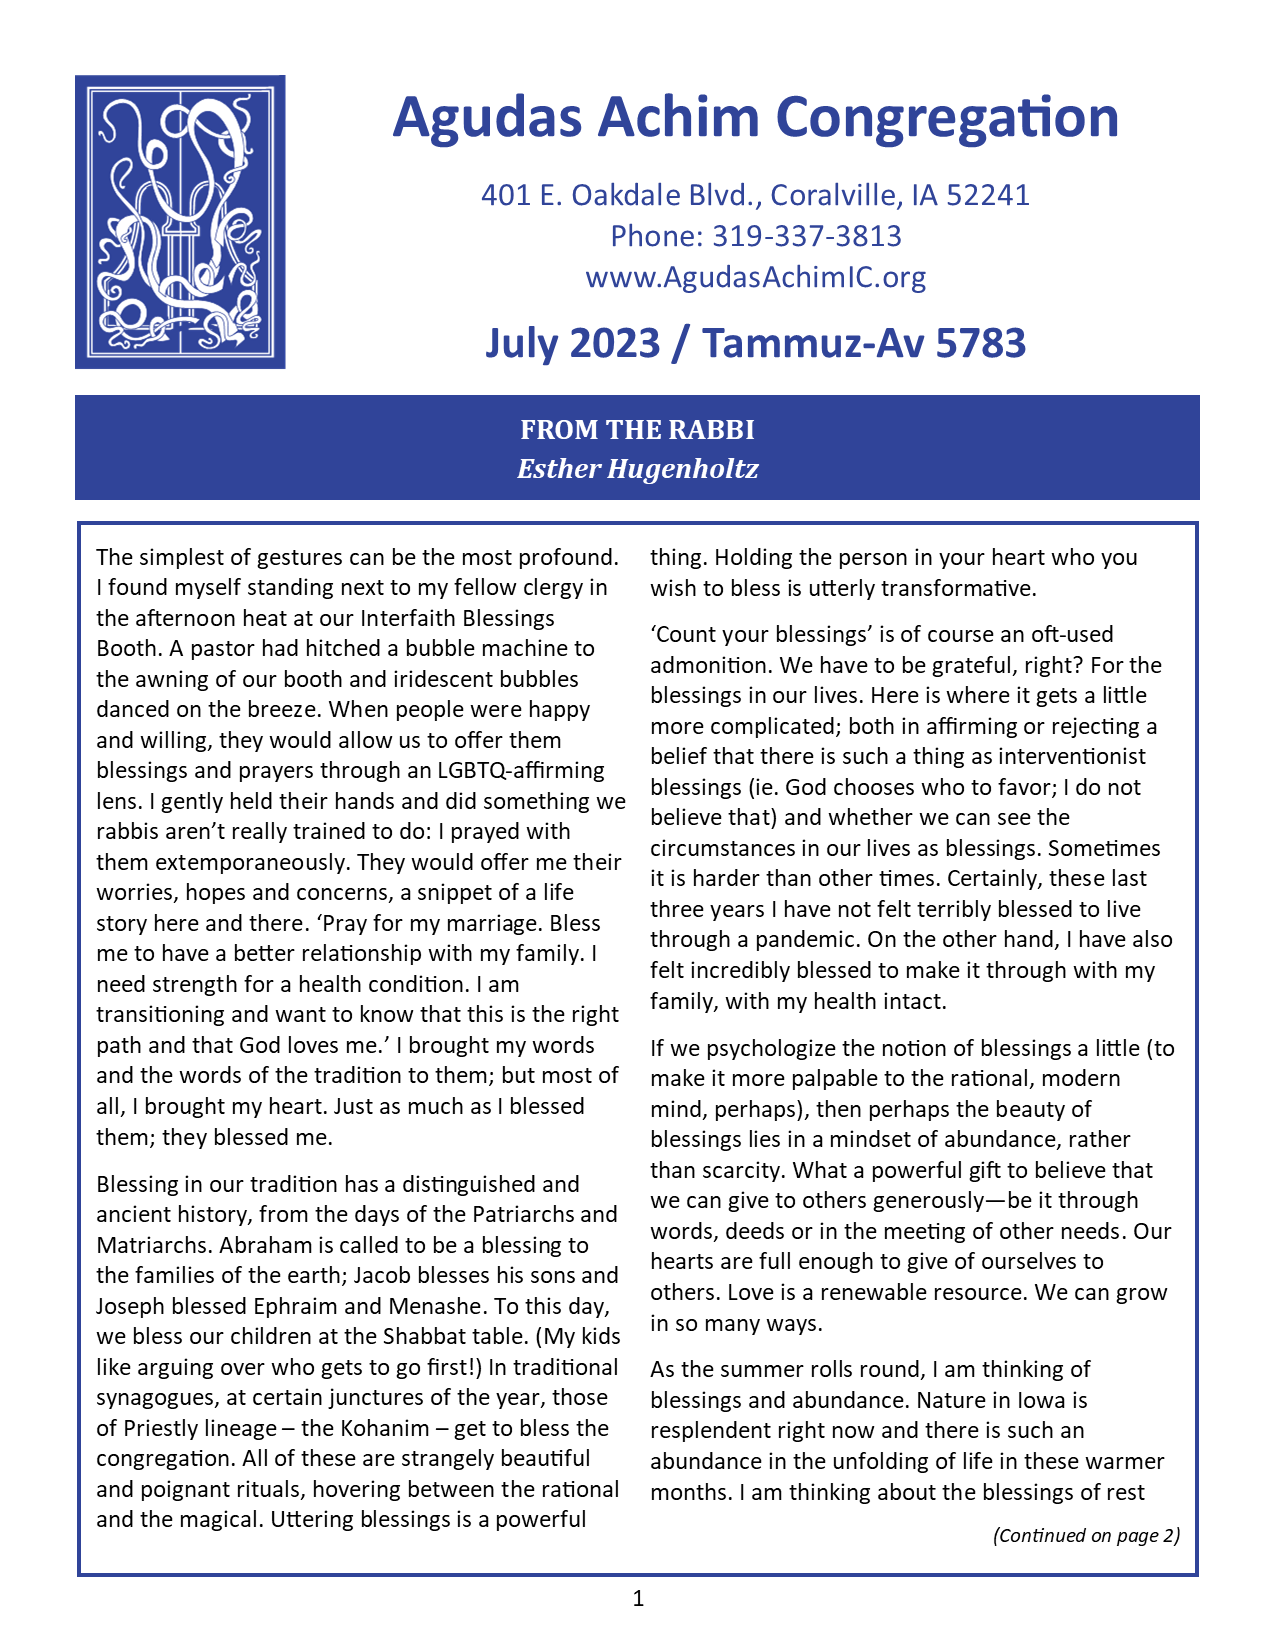 July 2023 Bulletin Cover